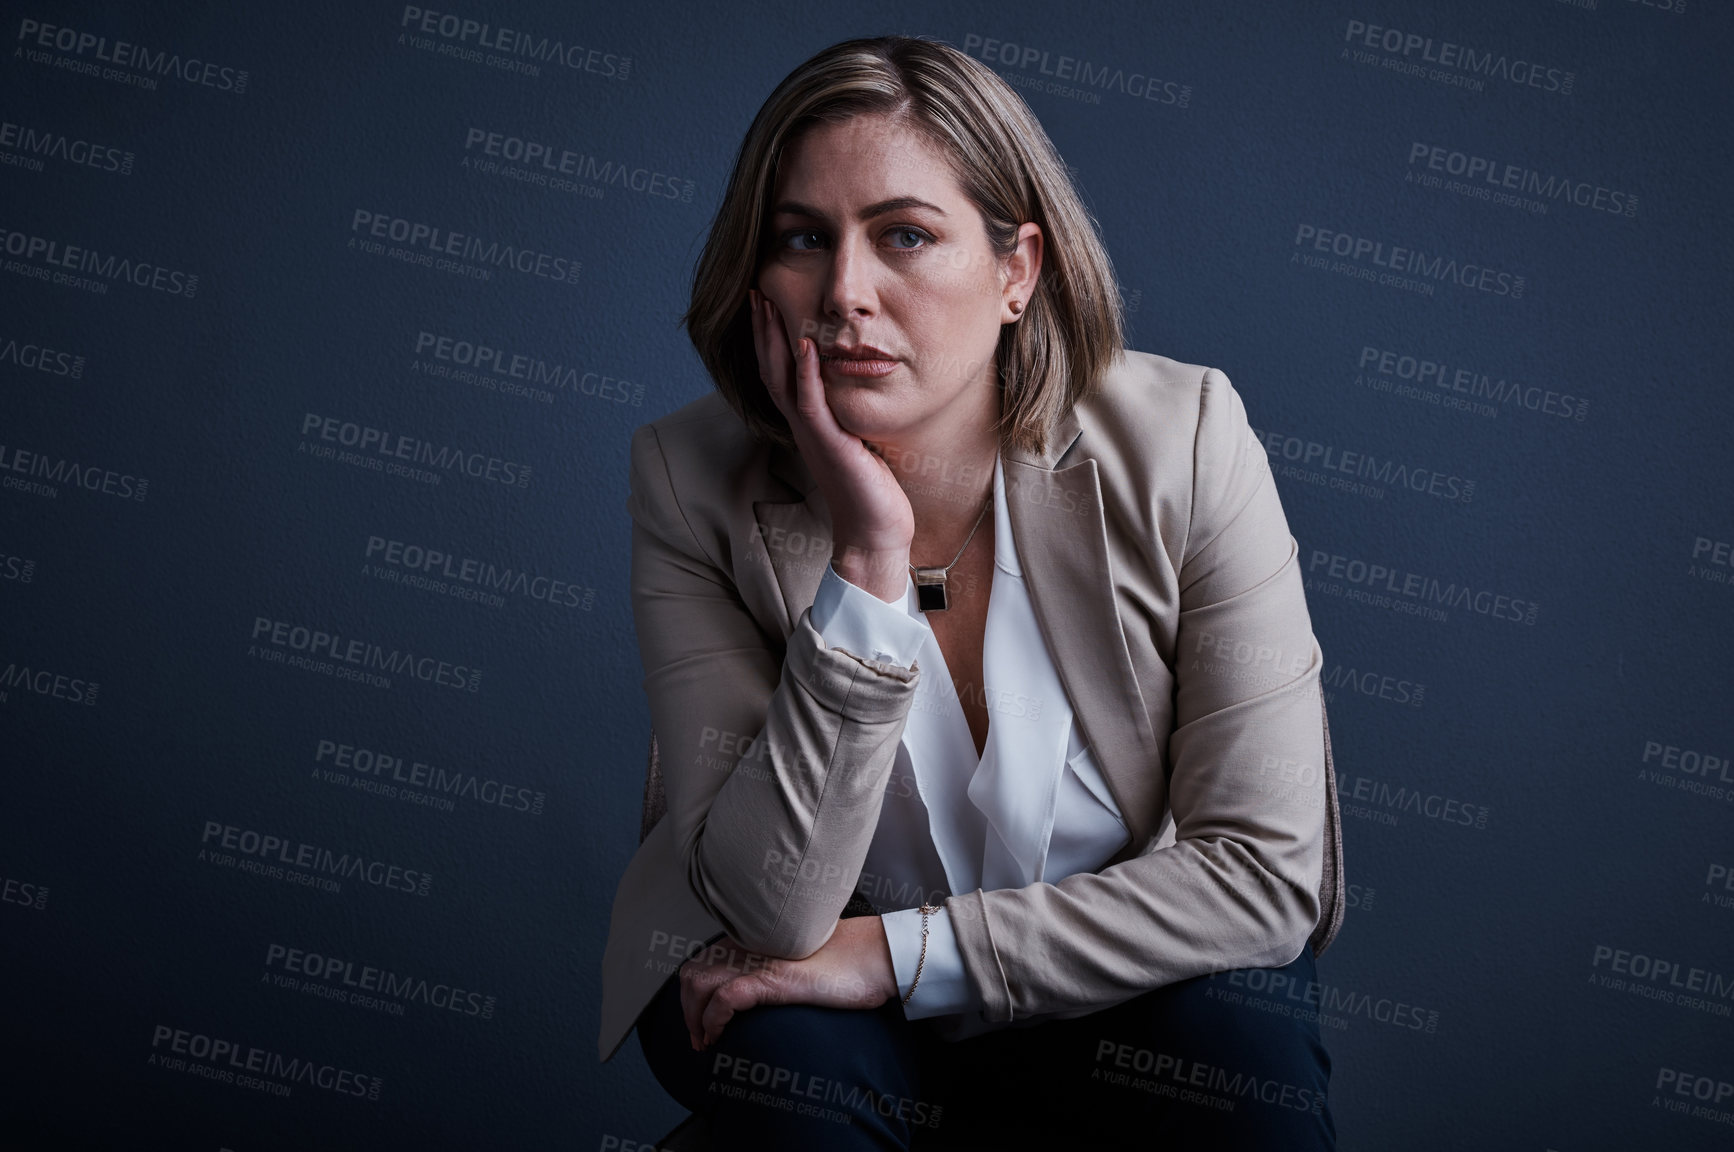 Buy stock photo Studio portrait of a young corporate businesswoman looking stressed against a dark background